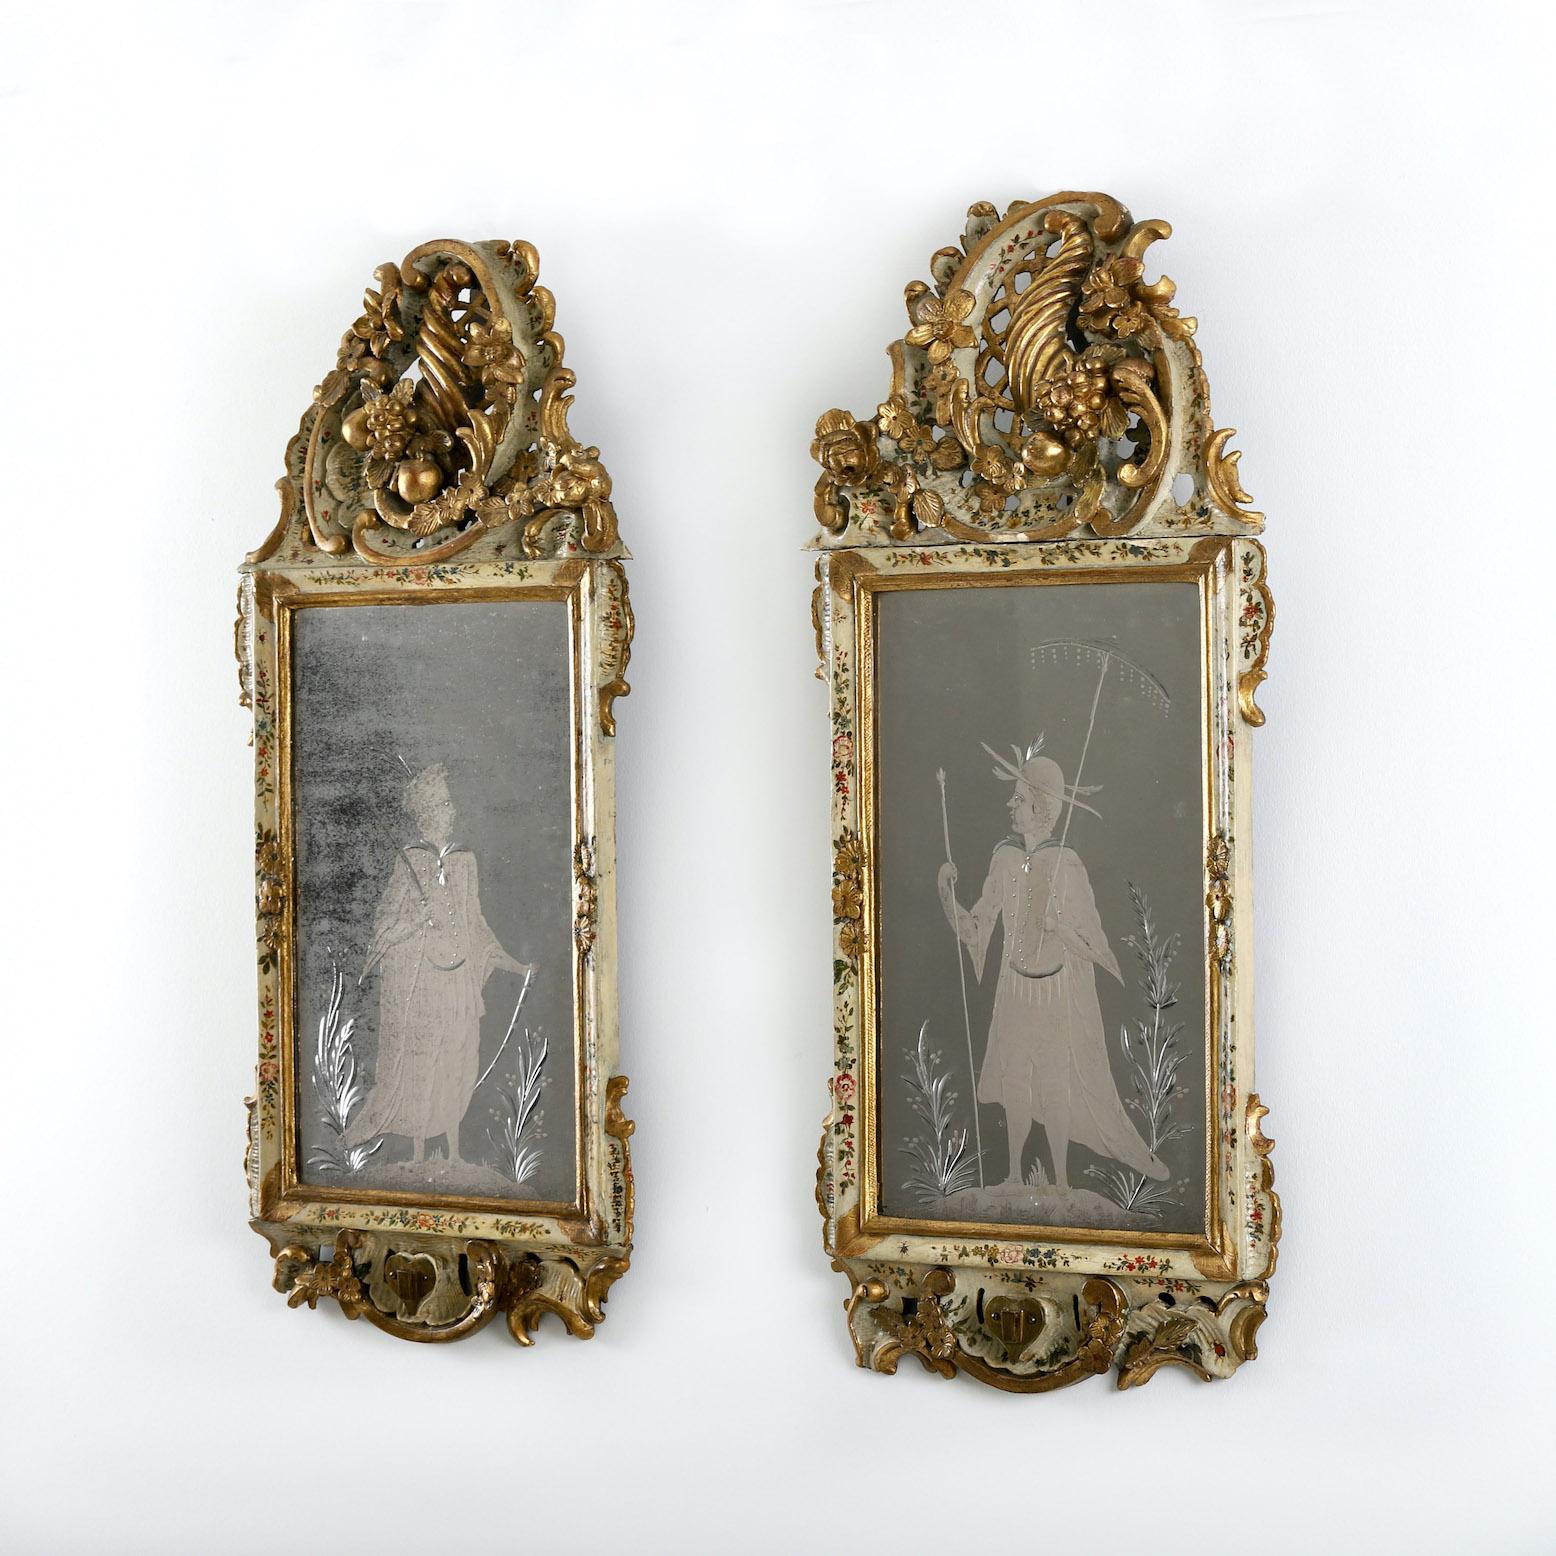 Vagabond presents a pair of 18th century Venetian mirrors

Italy, Venice, Circa 1770

” A truly wonderful pair of 18th century painted venetian mirrors with the finest quality etched glassed plates of chinoiserie figures, detachable later candle